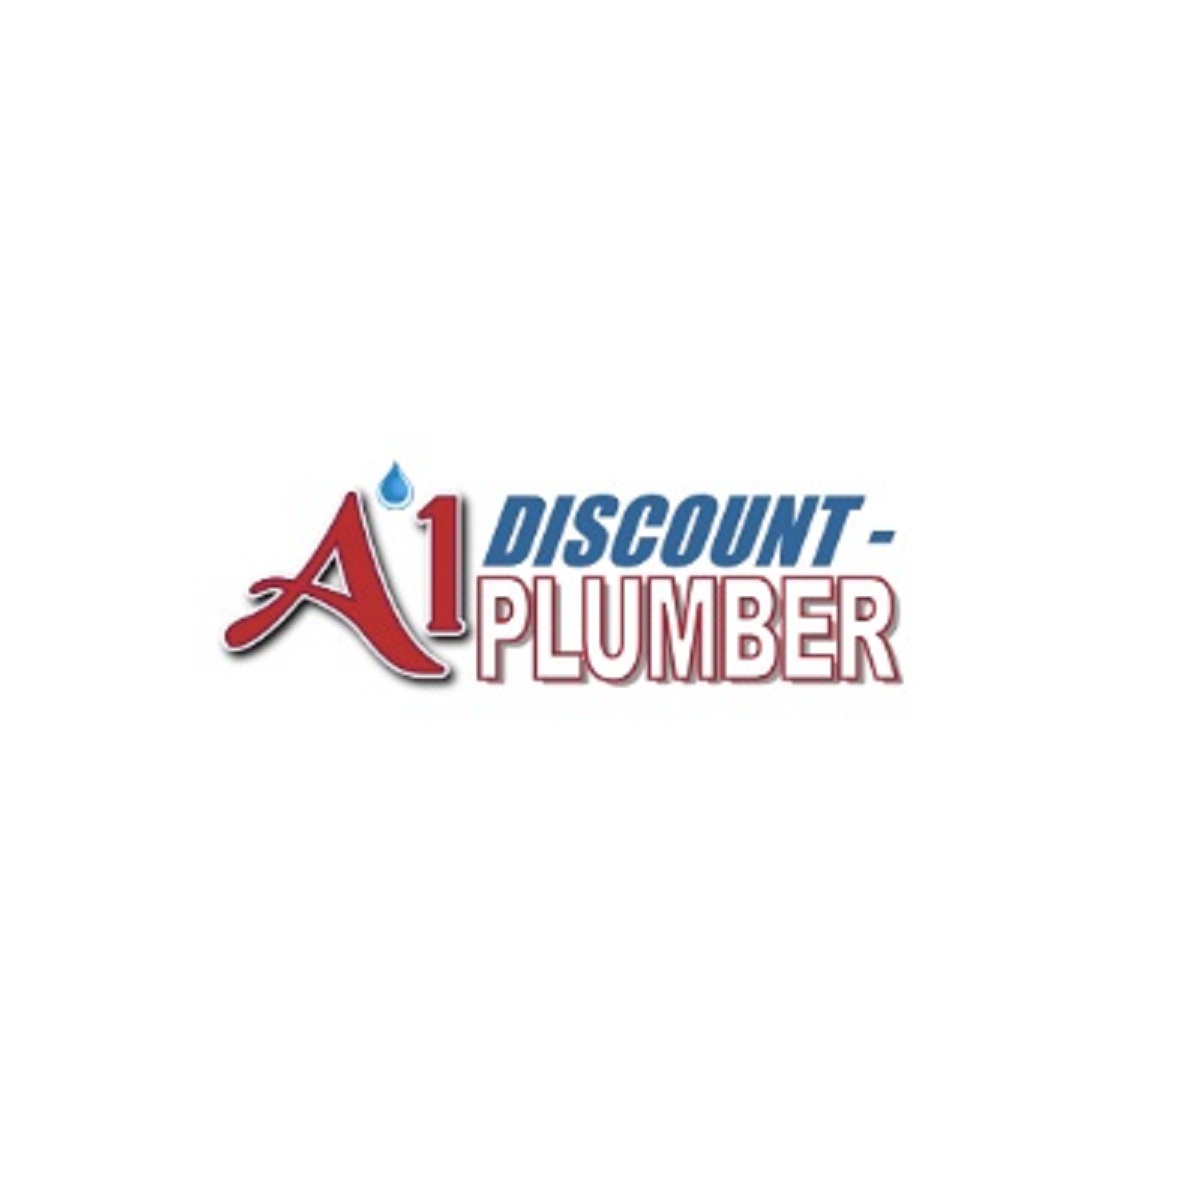 A1 Discount Plumber Mansfield Cover Image